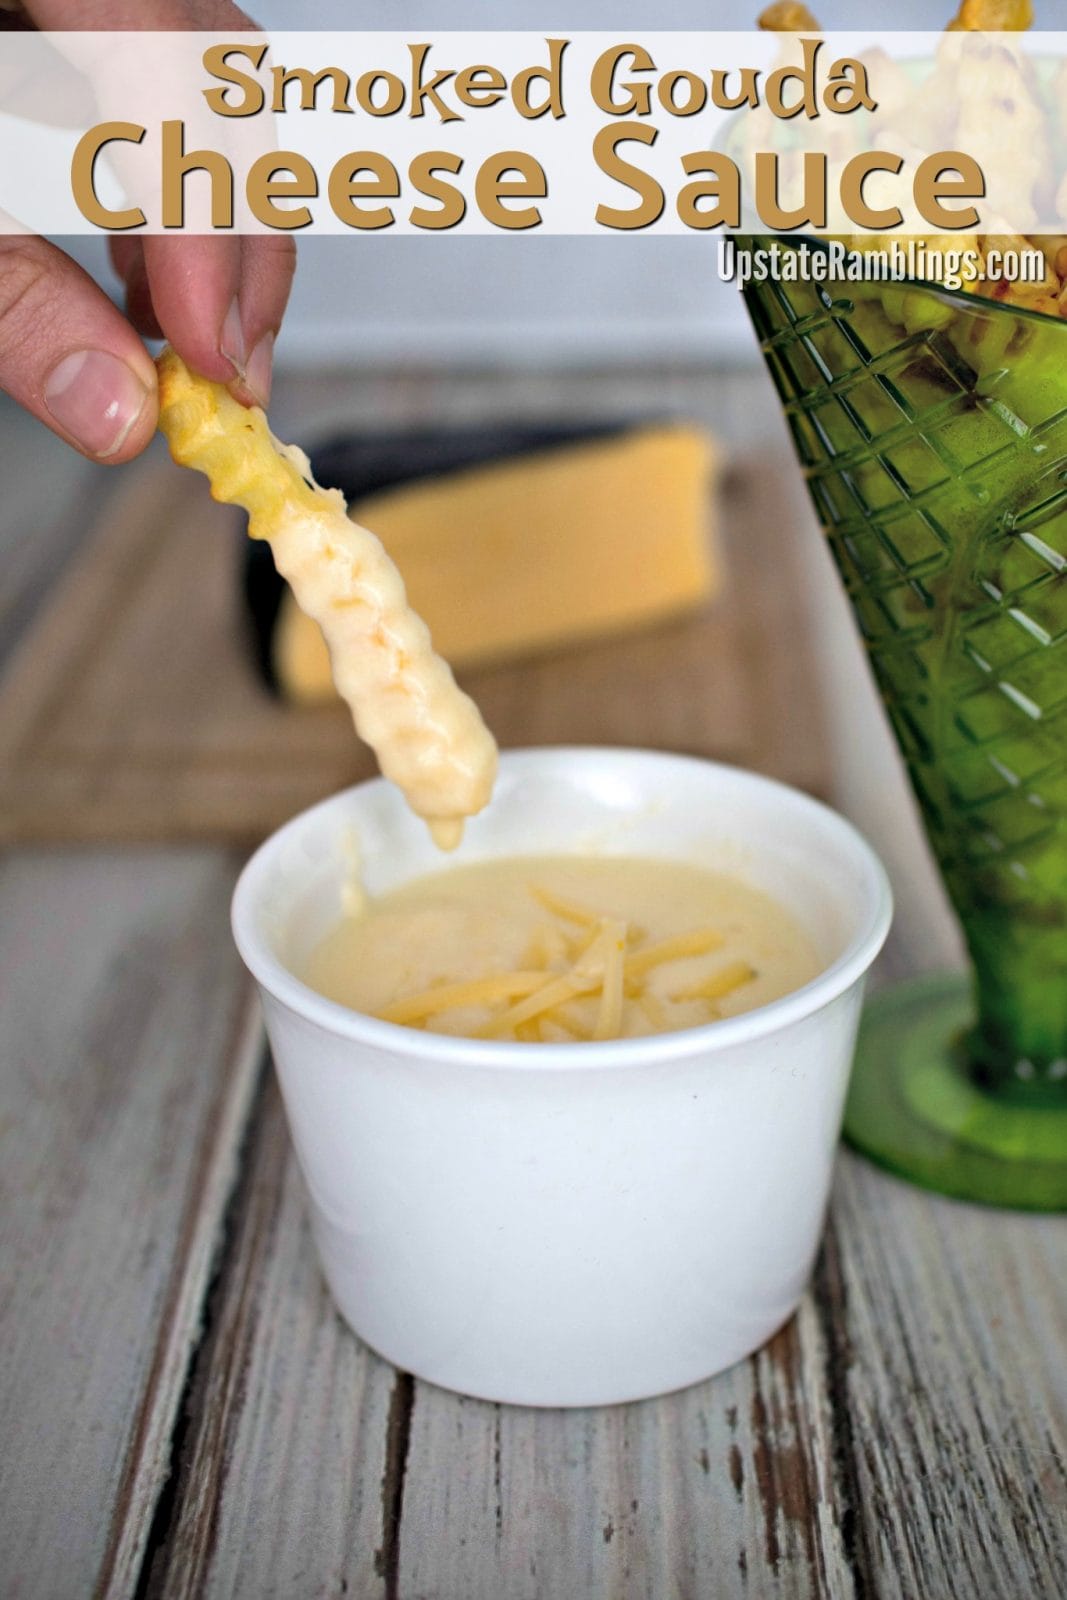 This Gouda Cheese Sauce is the perfect creamy cheese sauce for fries, pretzels, tortilla chips or pasta. The rich and creamy cheese sauce goes perfectly on cheese fries and makes both a great comfort food and a delicious cheese dip for party appetizers. #cheesesauce #dipping #gouda